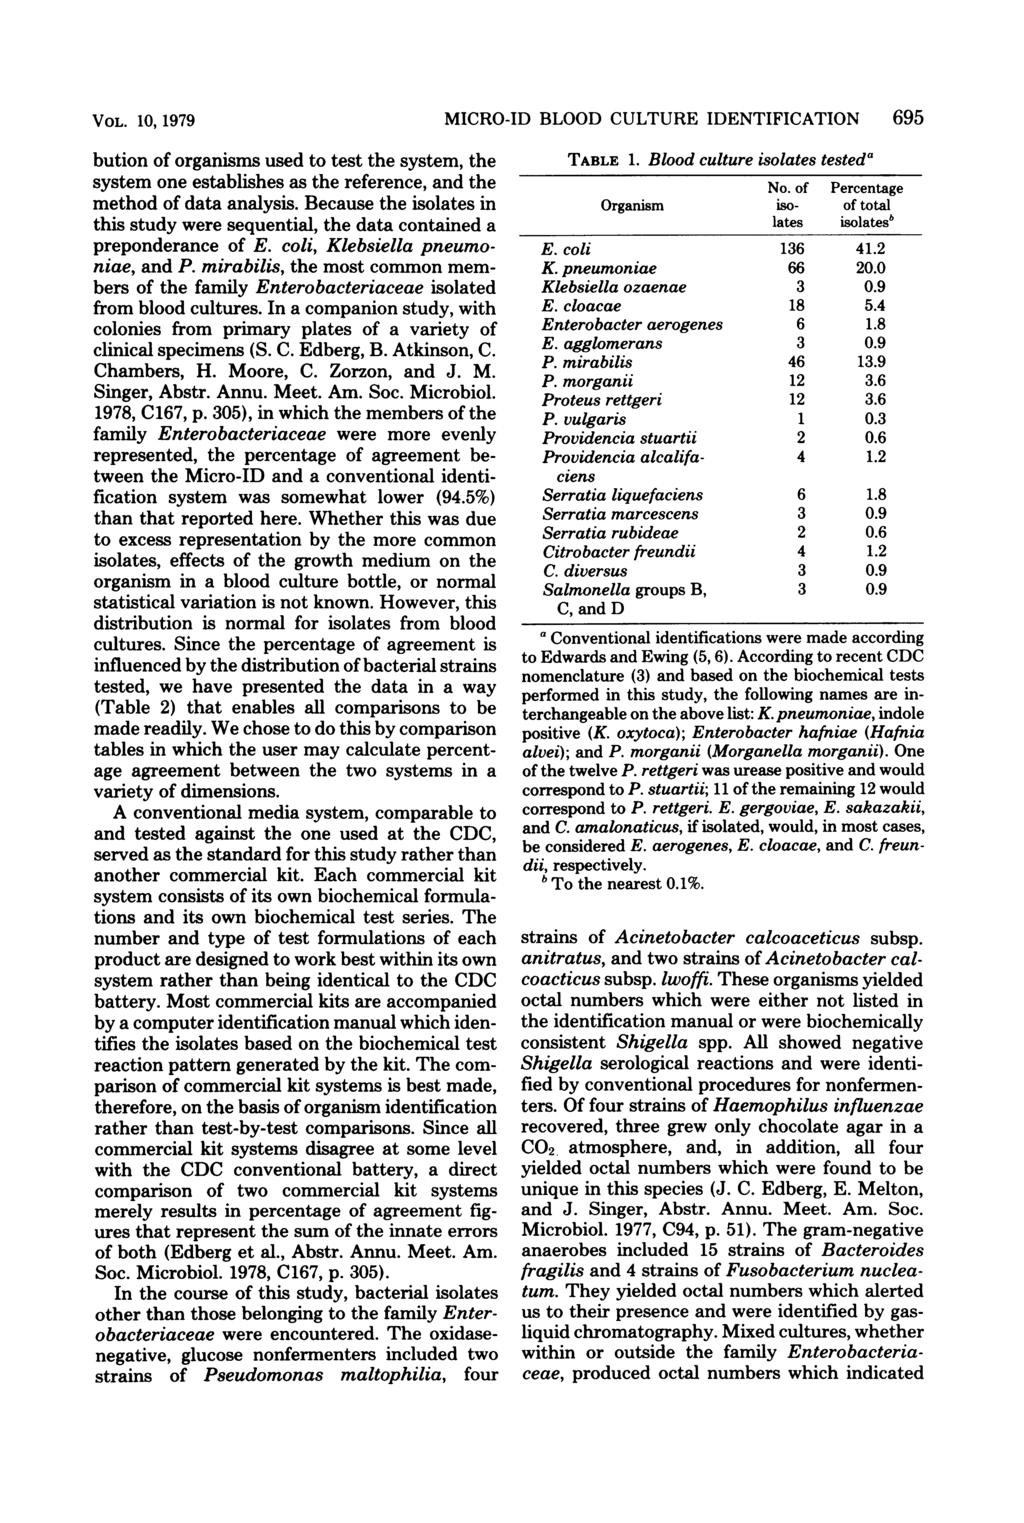 VOL. 10, 1979 bution of organisms used to test the system, the system one establishes as the reference, and the method of data analysis.